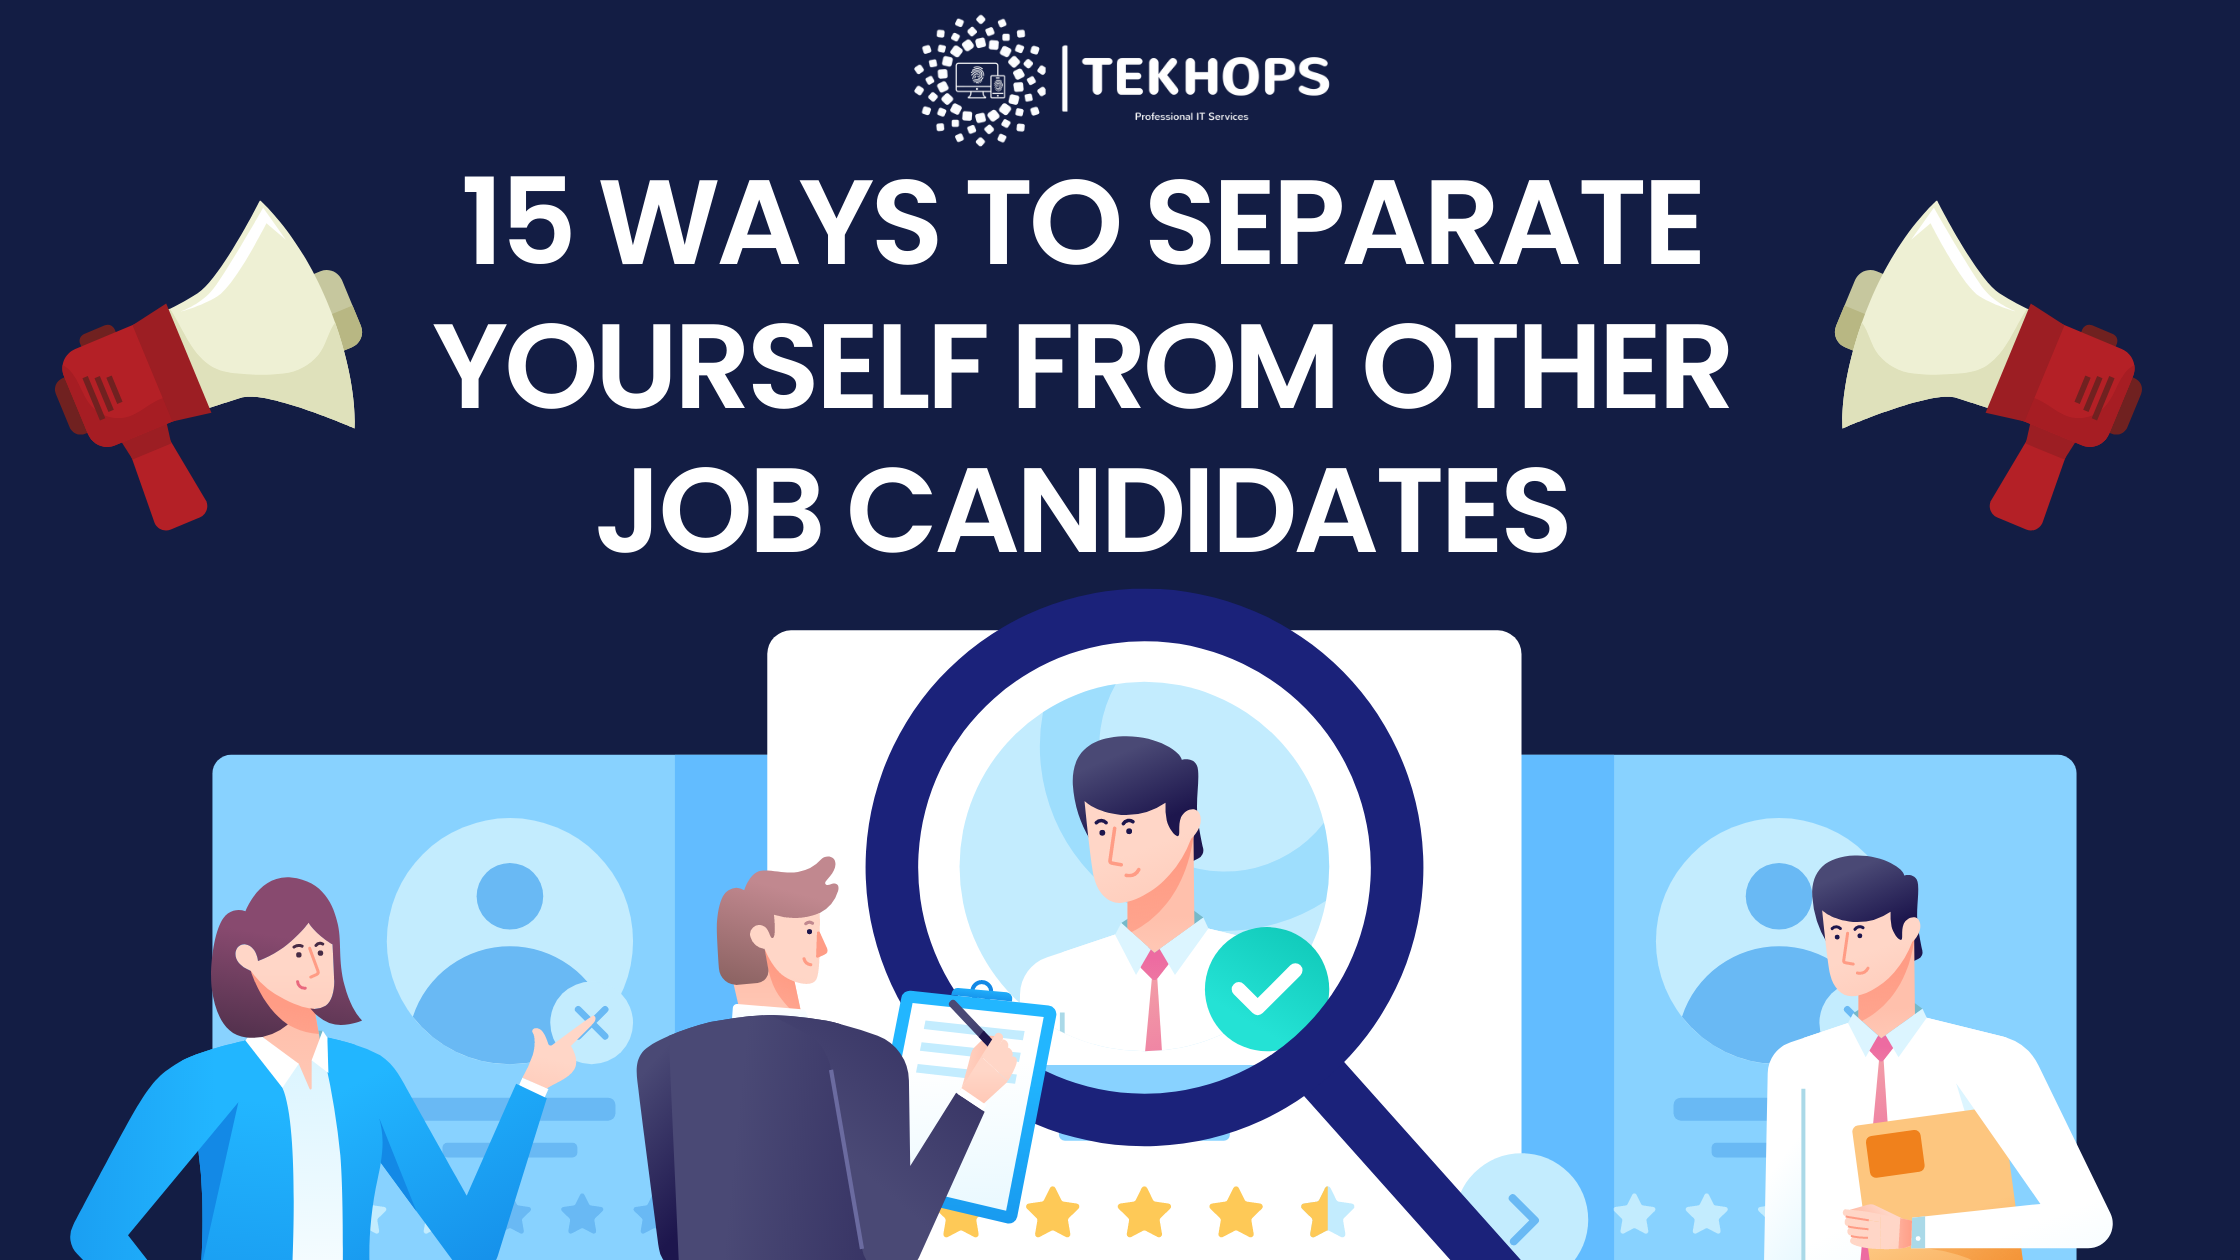 15 Ways to Separate Yourself from Other Job Candidates